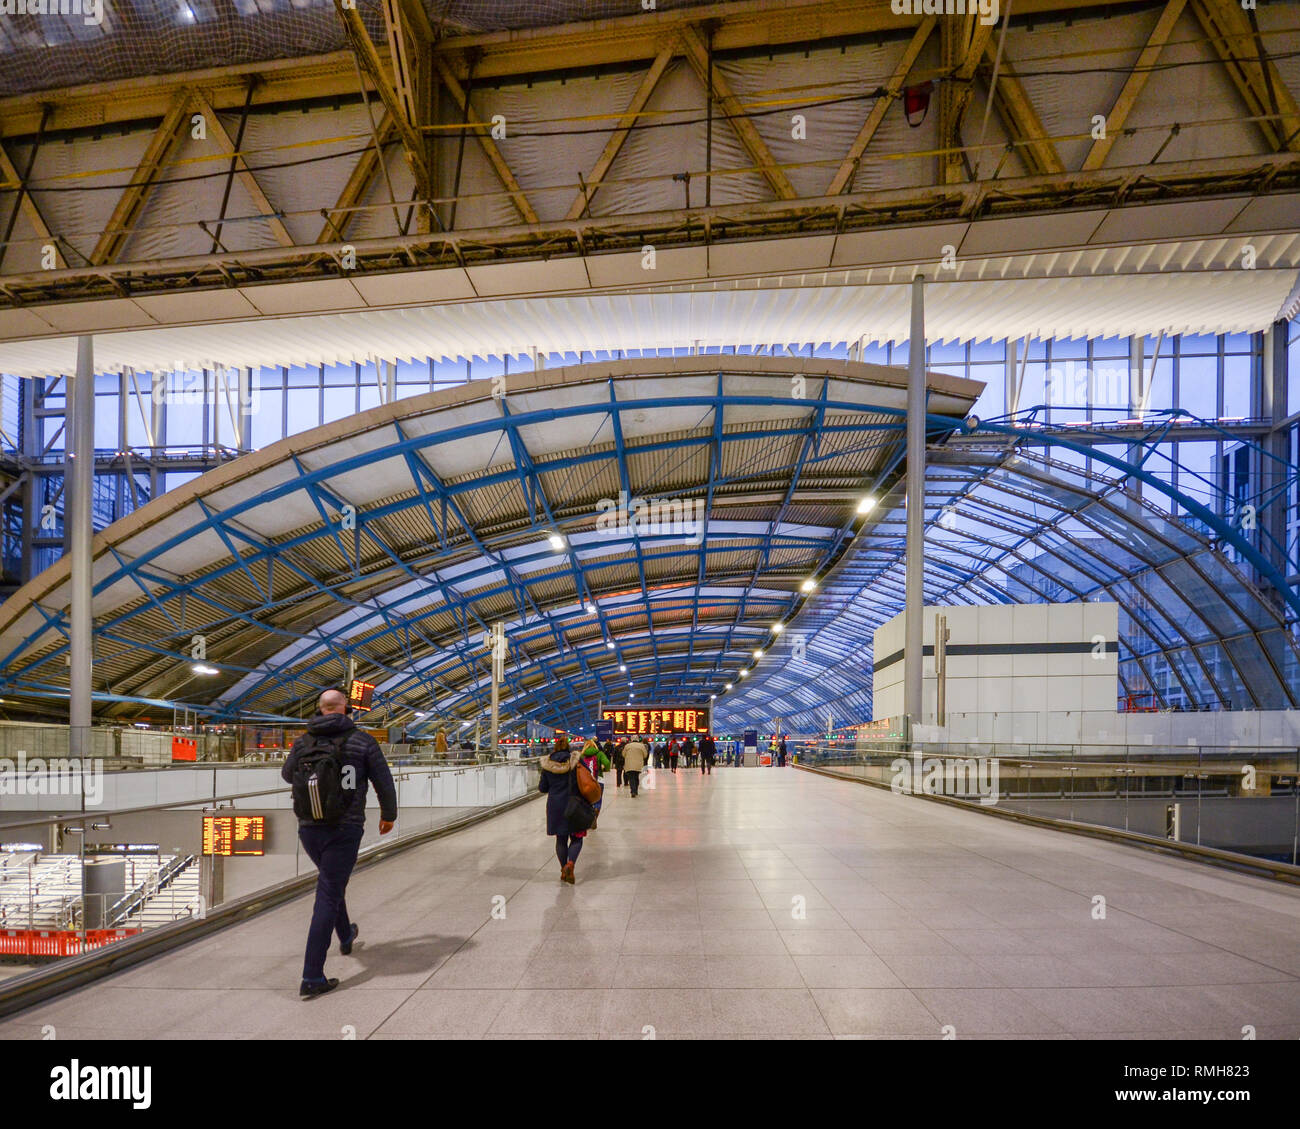 London, Feb 13, 2019: Inside view of passengers at Waterloo Station, one of London's largest rail stations with impressive architecture Stock Photo